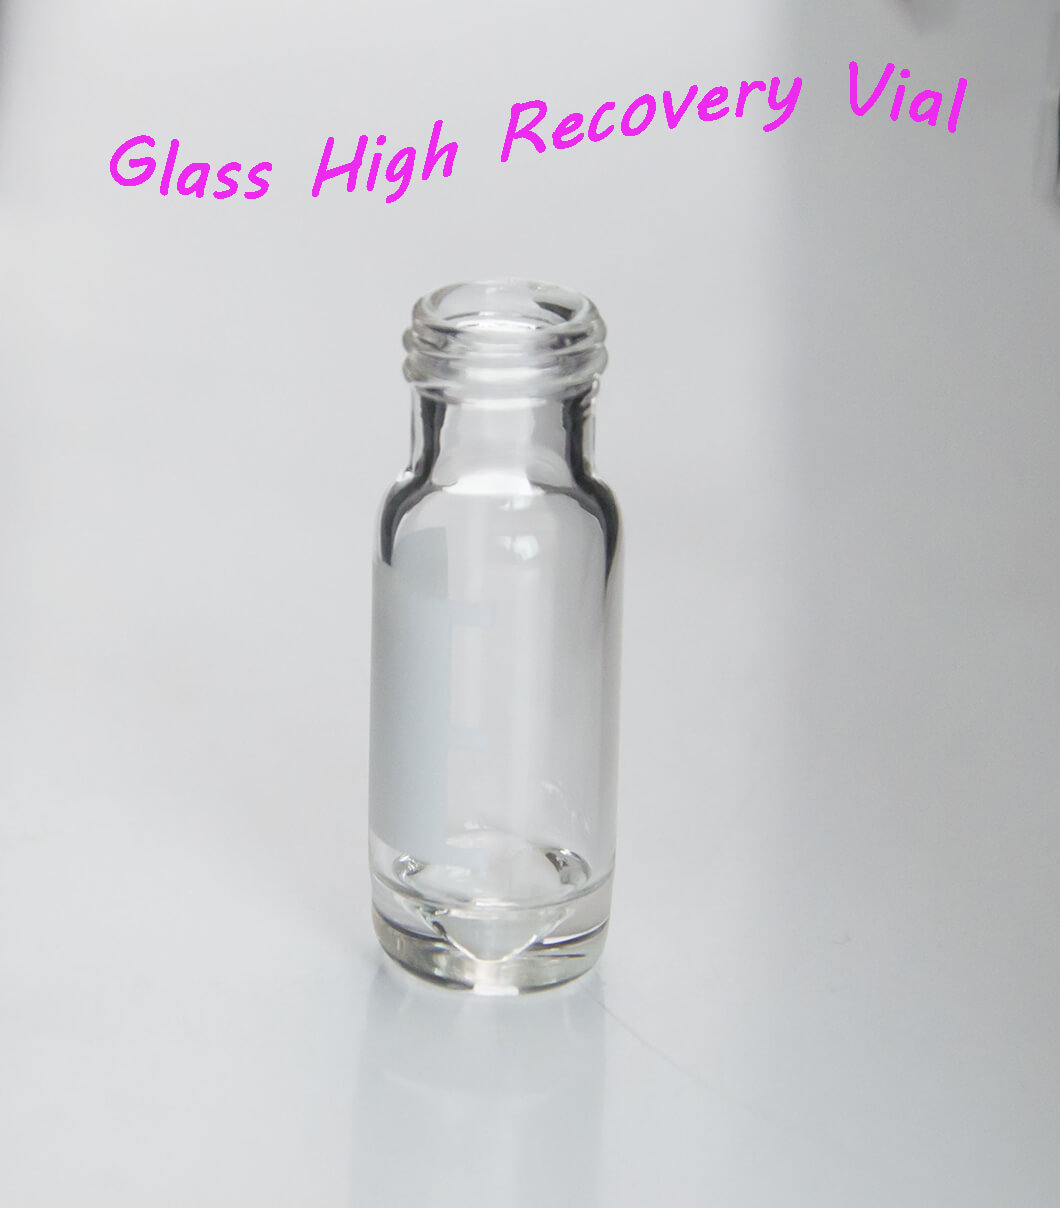 Glass recovery vial